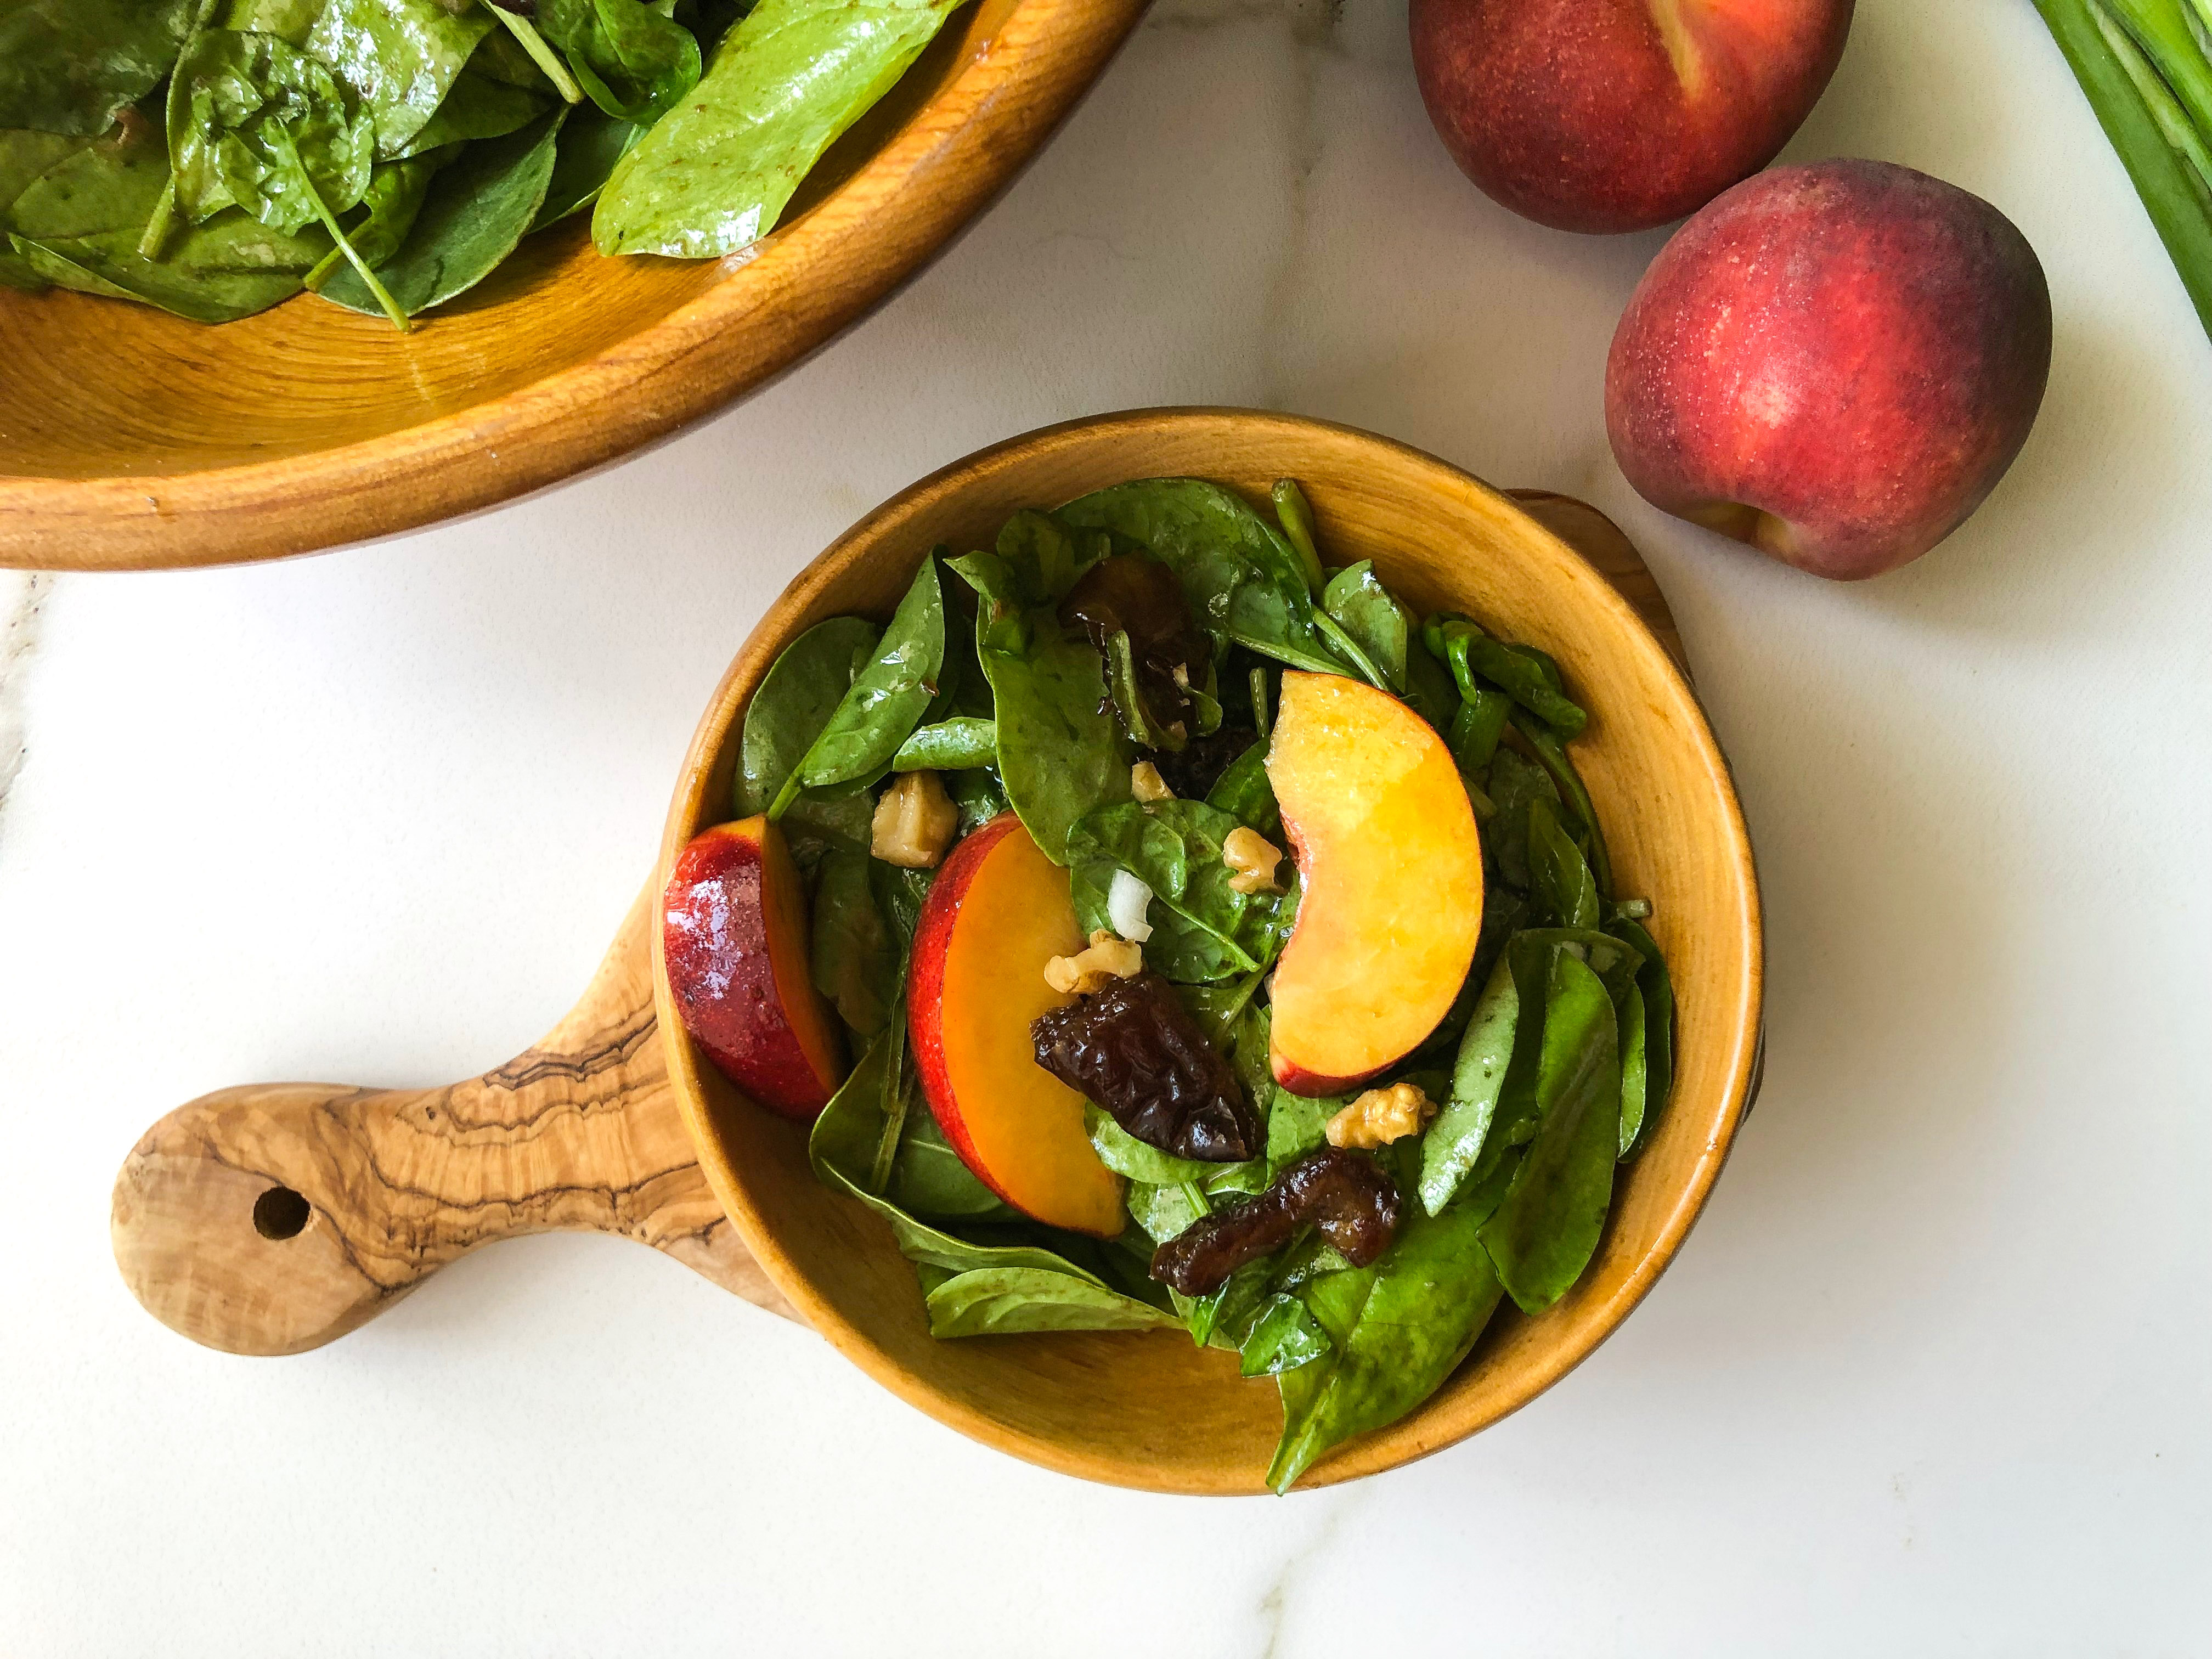 Spinach salad with peaches and dates